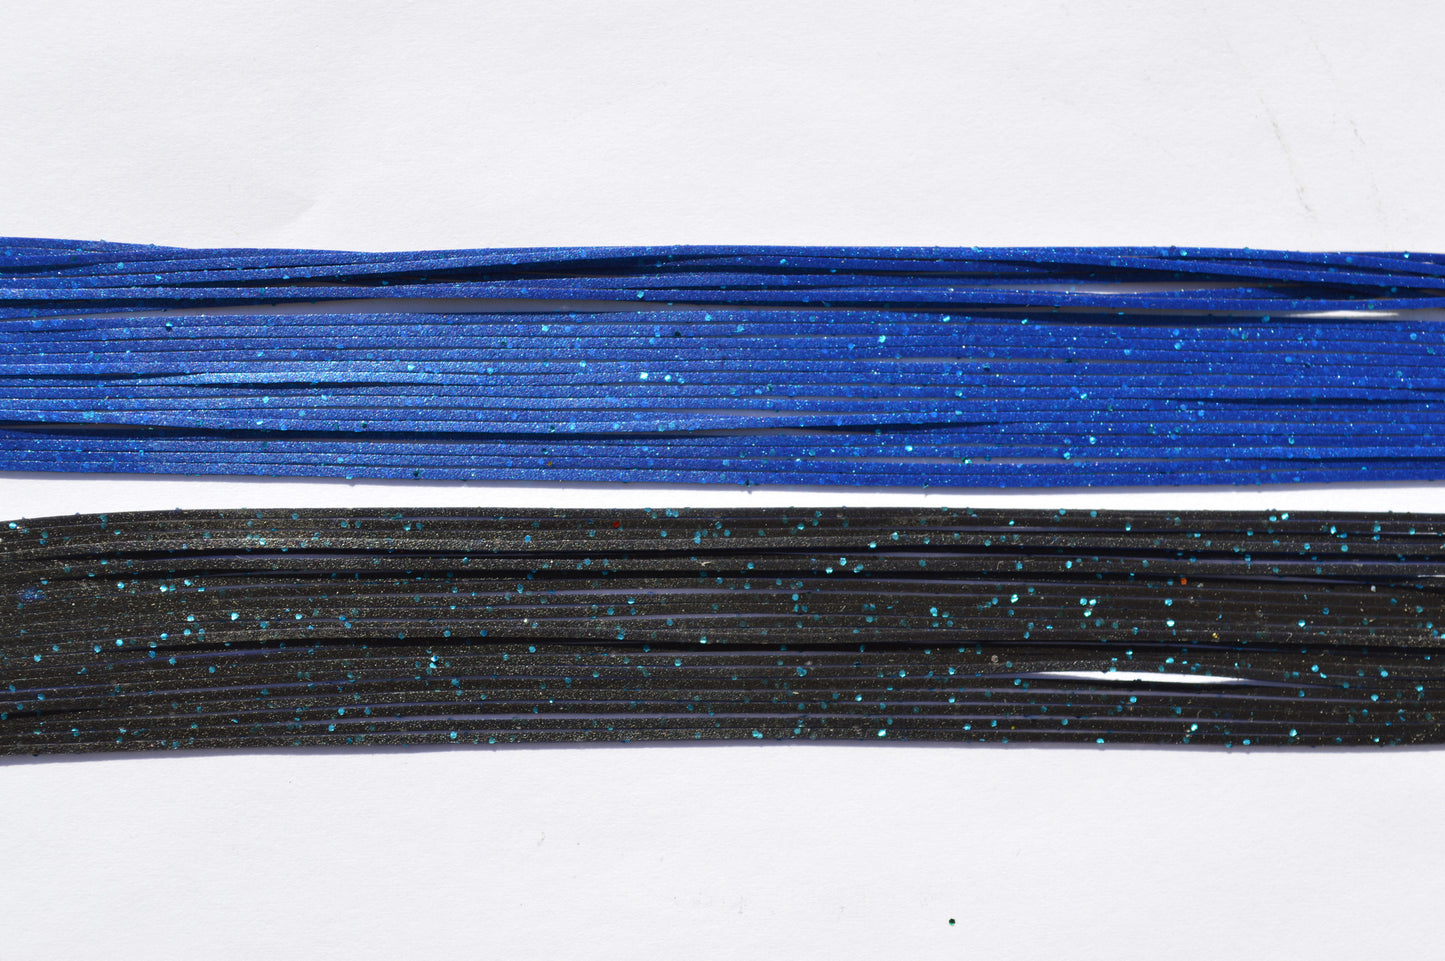 Black with Blue flake on 1 side, Metallic Blue with Blue flake on the other side-LM1